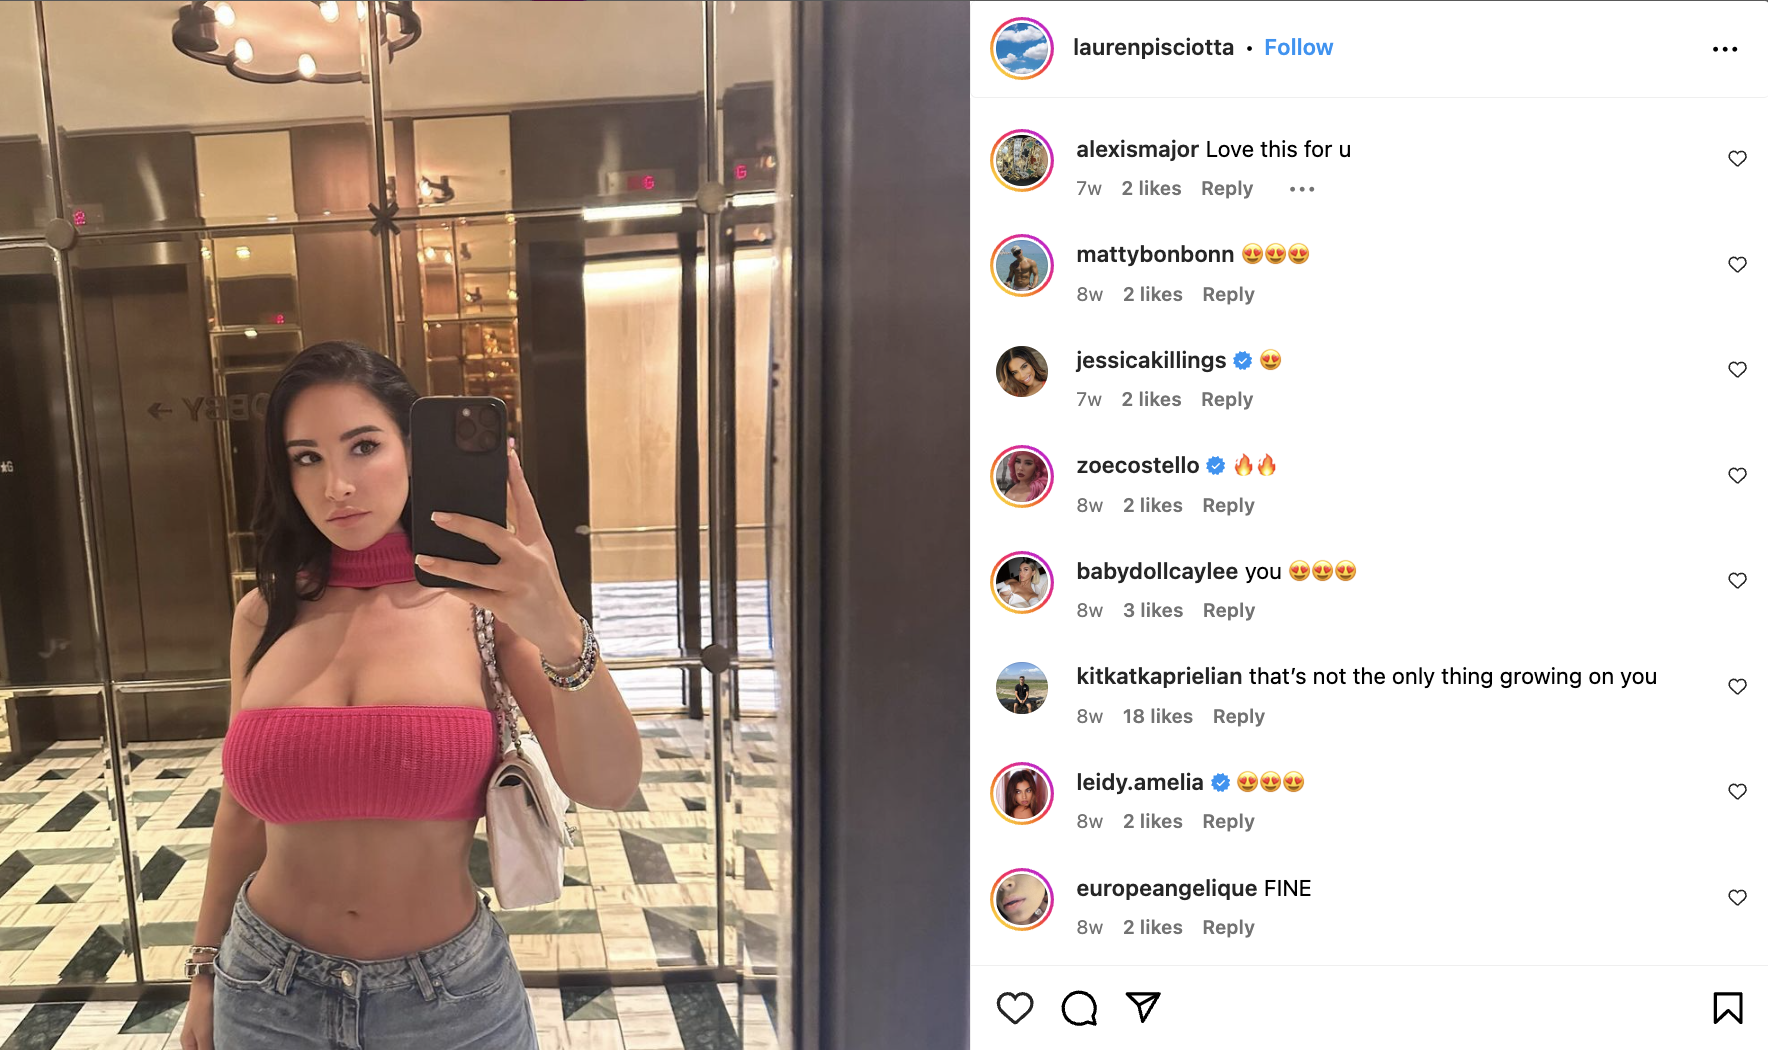 Lauren Pisciotta poses in a mirror selfie, wearing a cropped top and jeans. Comments from her Instagram followers are visible on the right